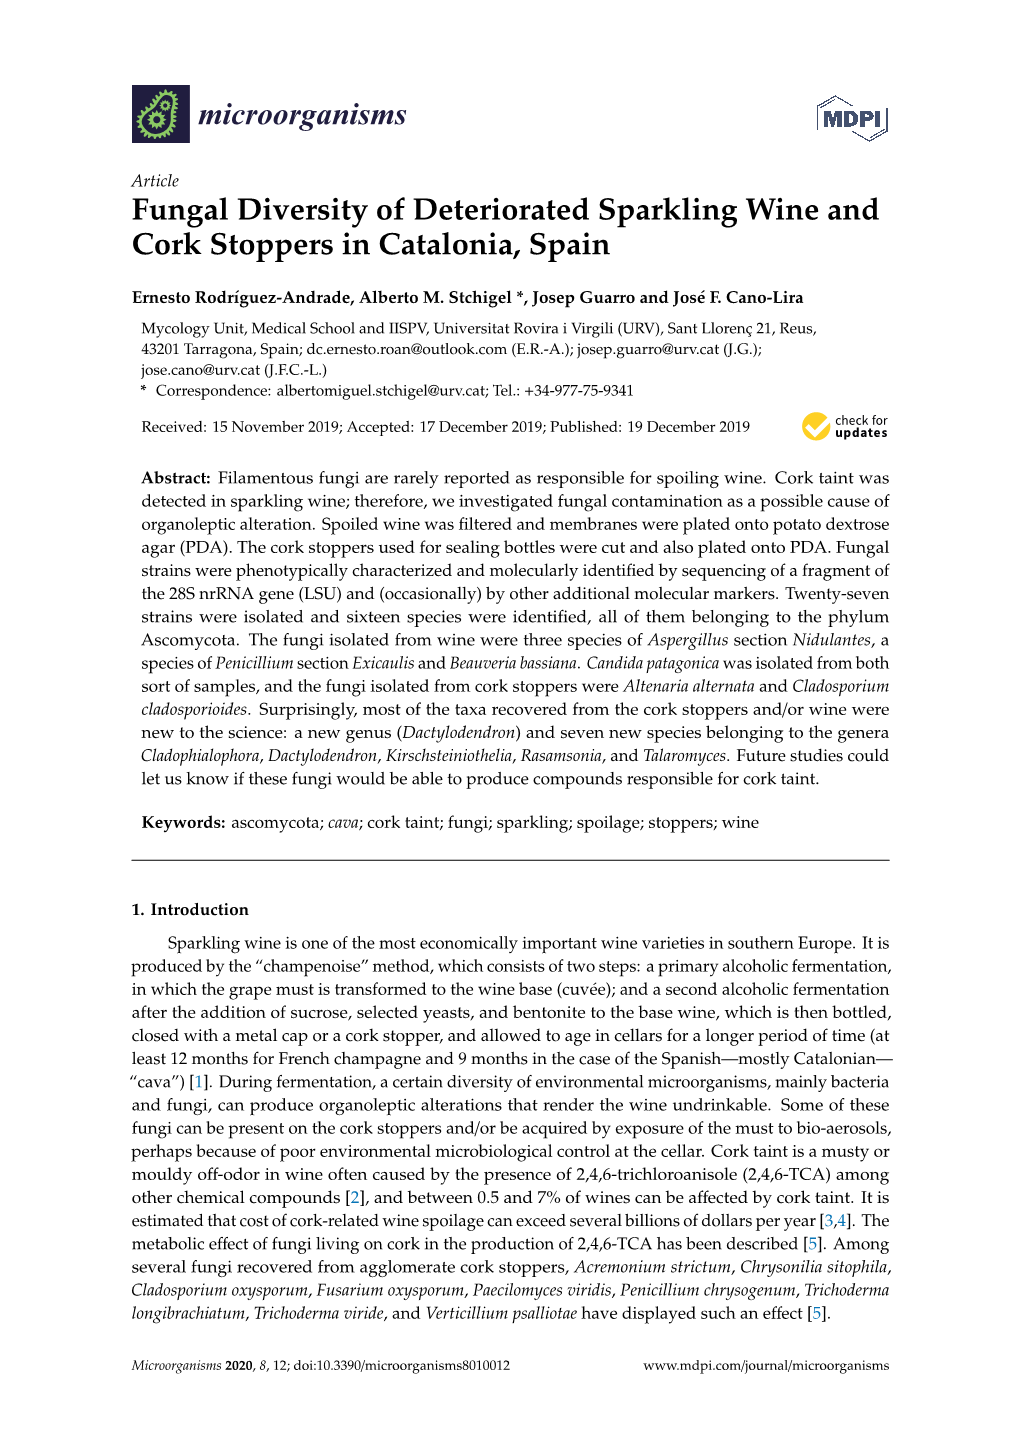 Fungal Diversity of Deteriorated Sparkling Wine and Cork Stoppers in Catalonia, Spain